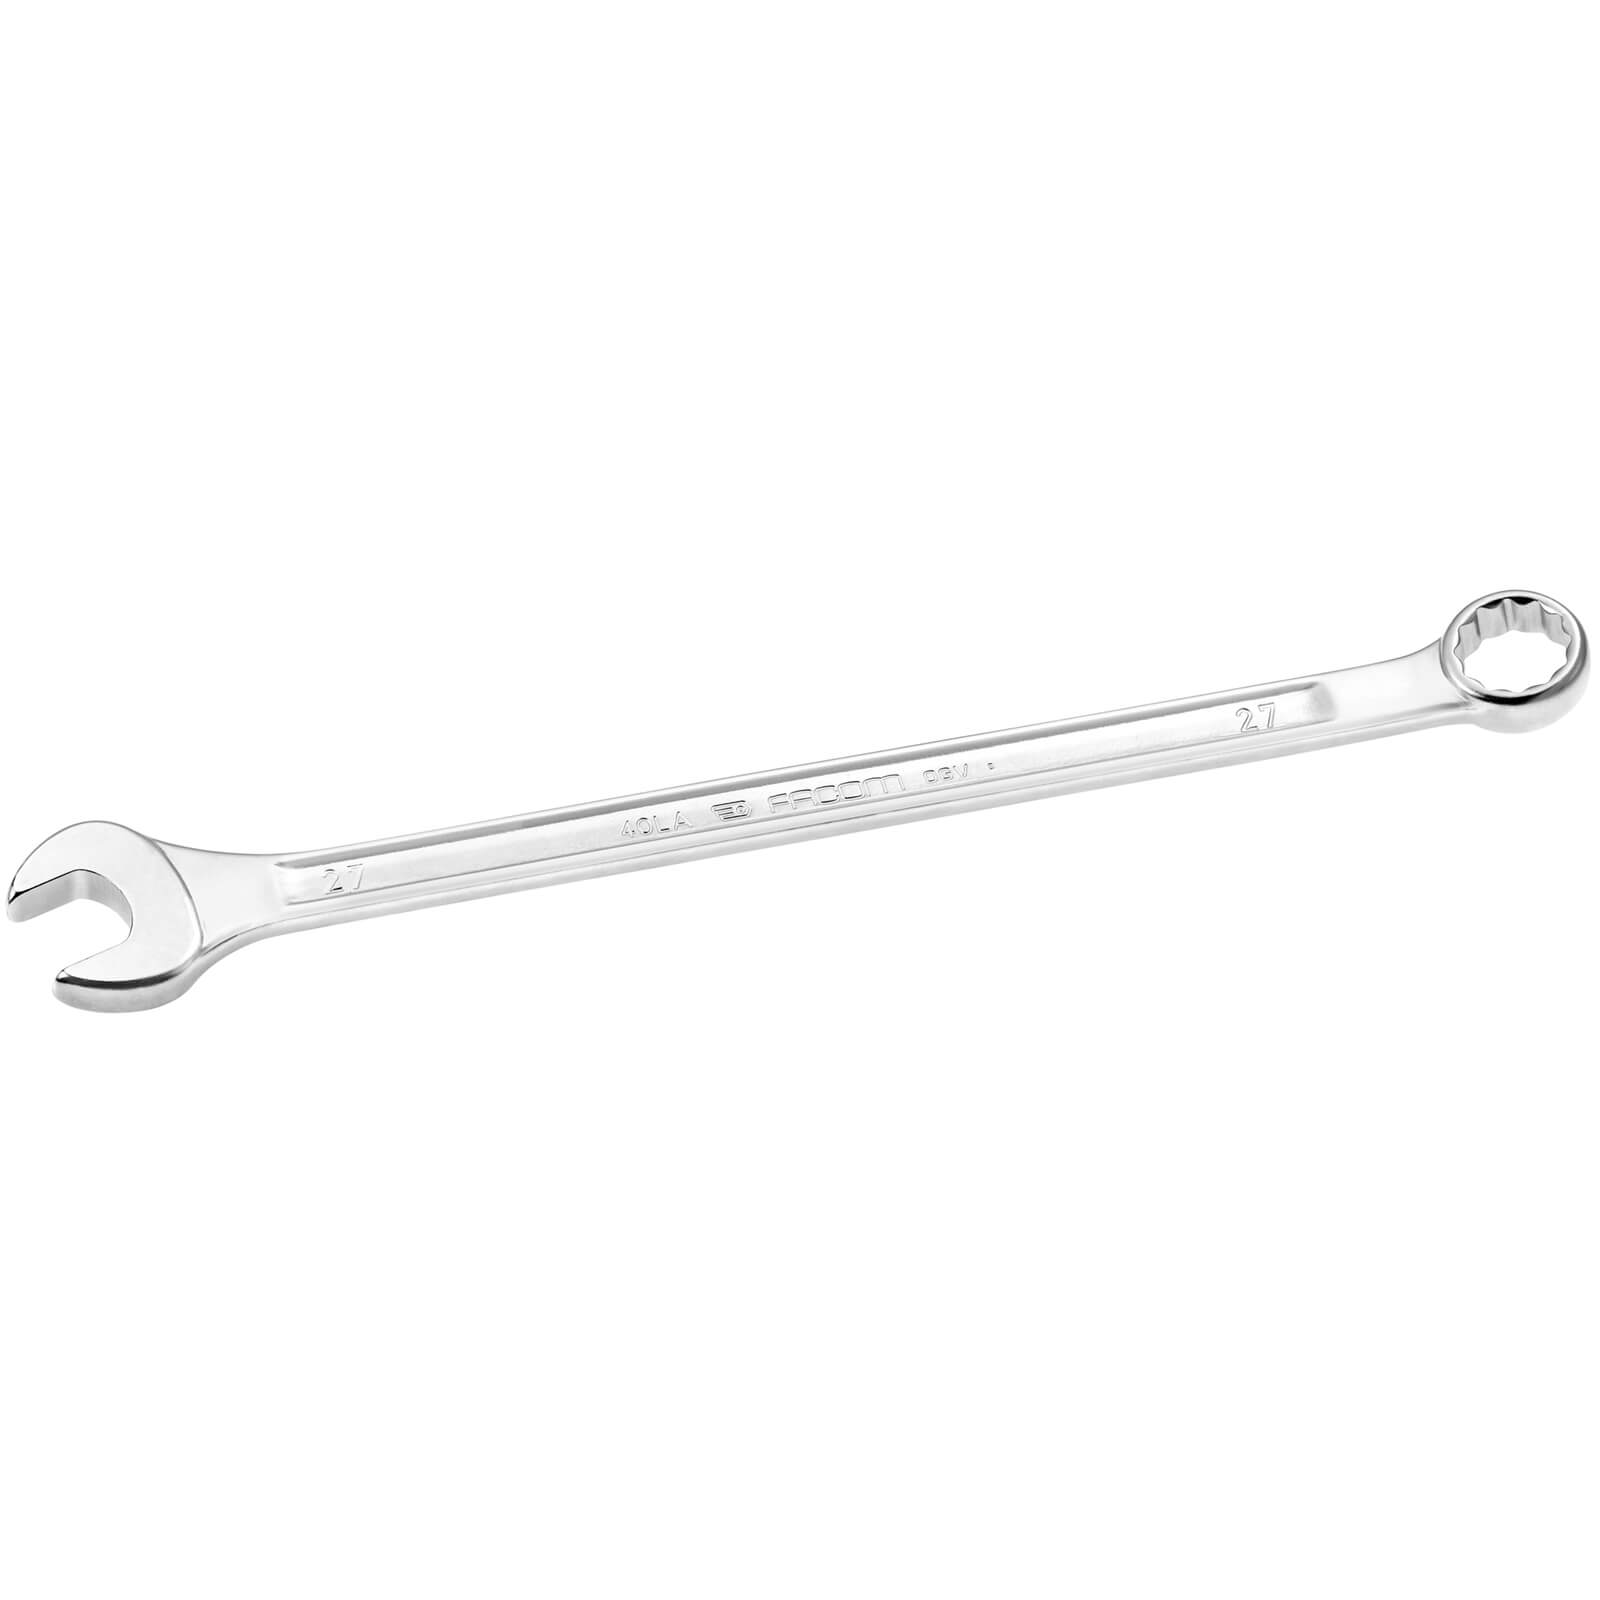 Image of Facom Long Reach Combination Spanner Metric 22mm